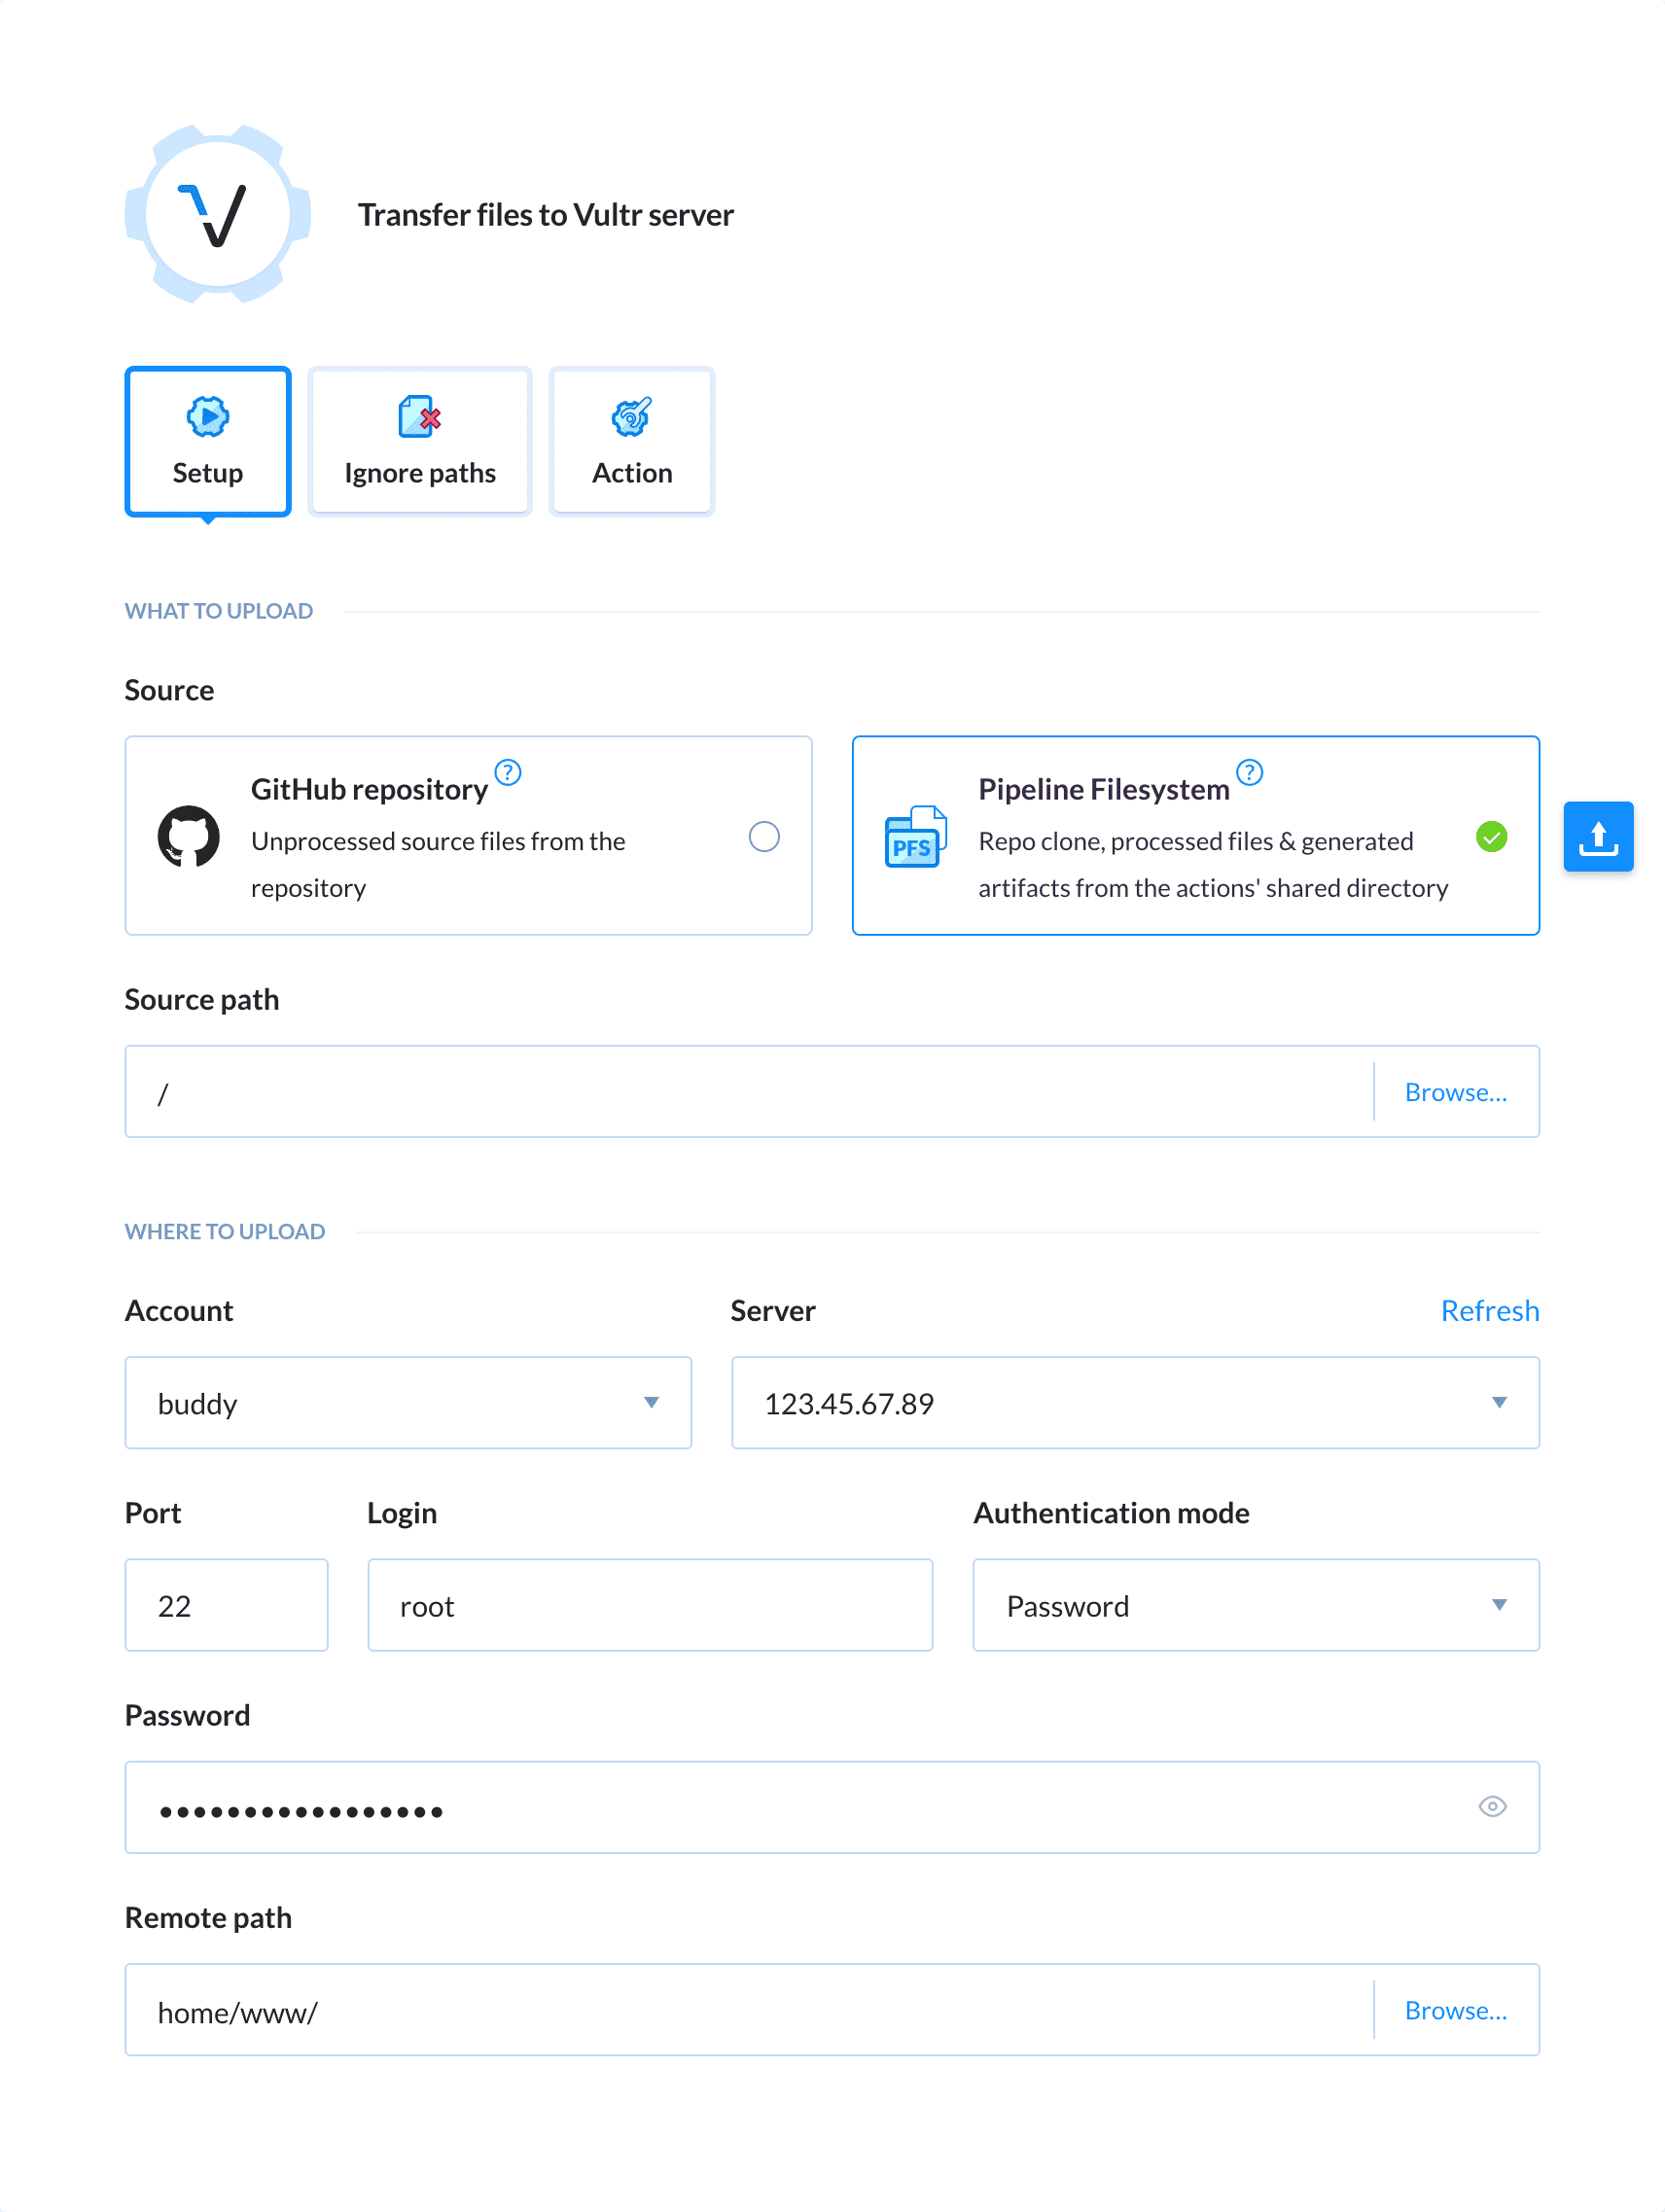 Preview Vultr action